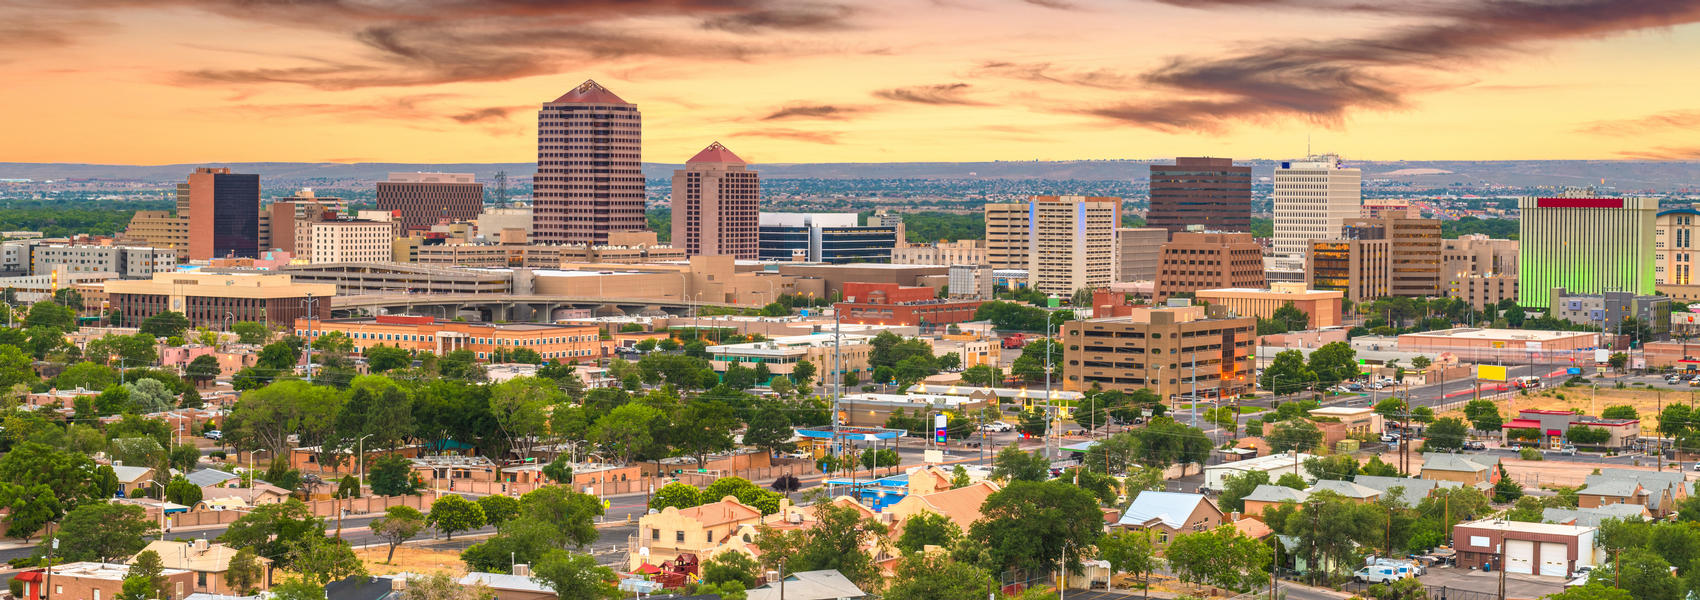 Panoramic view of downtown Albuquerque